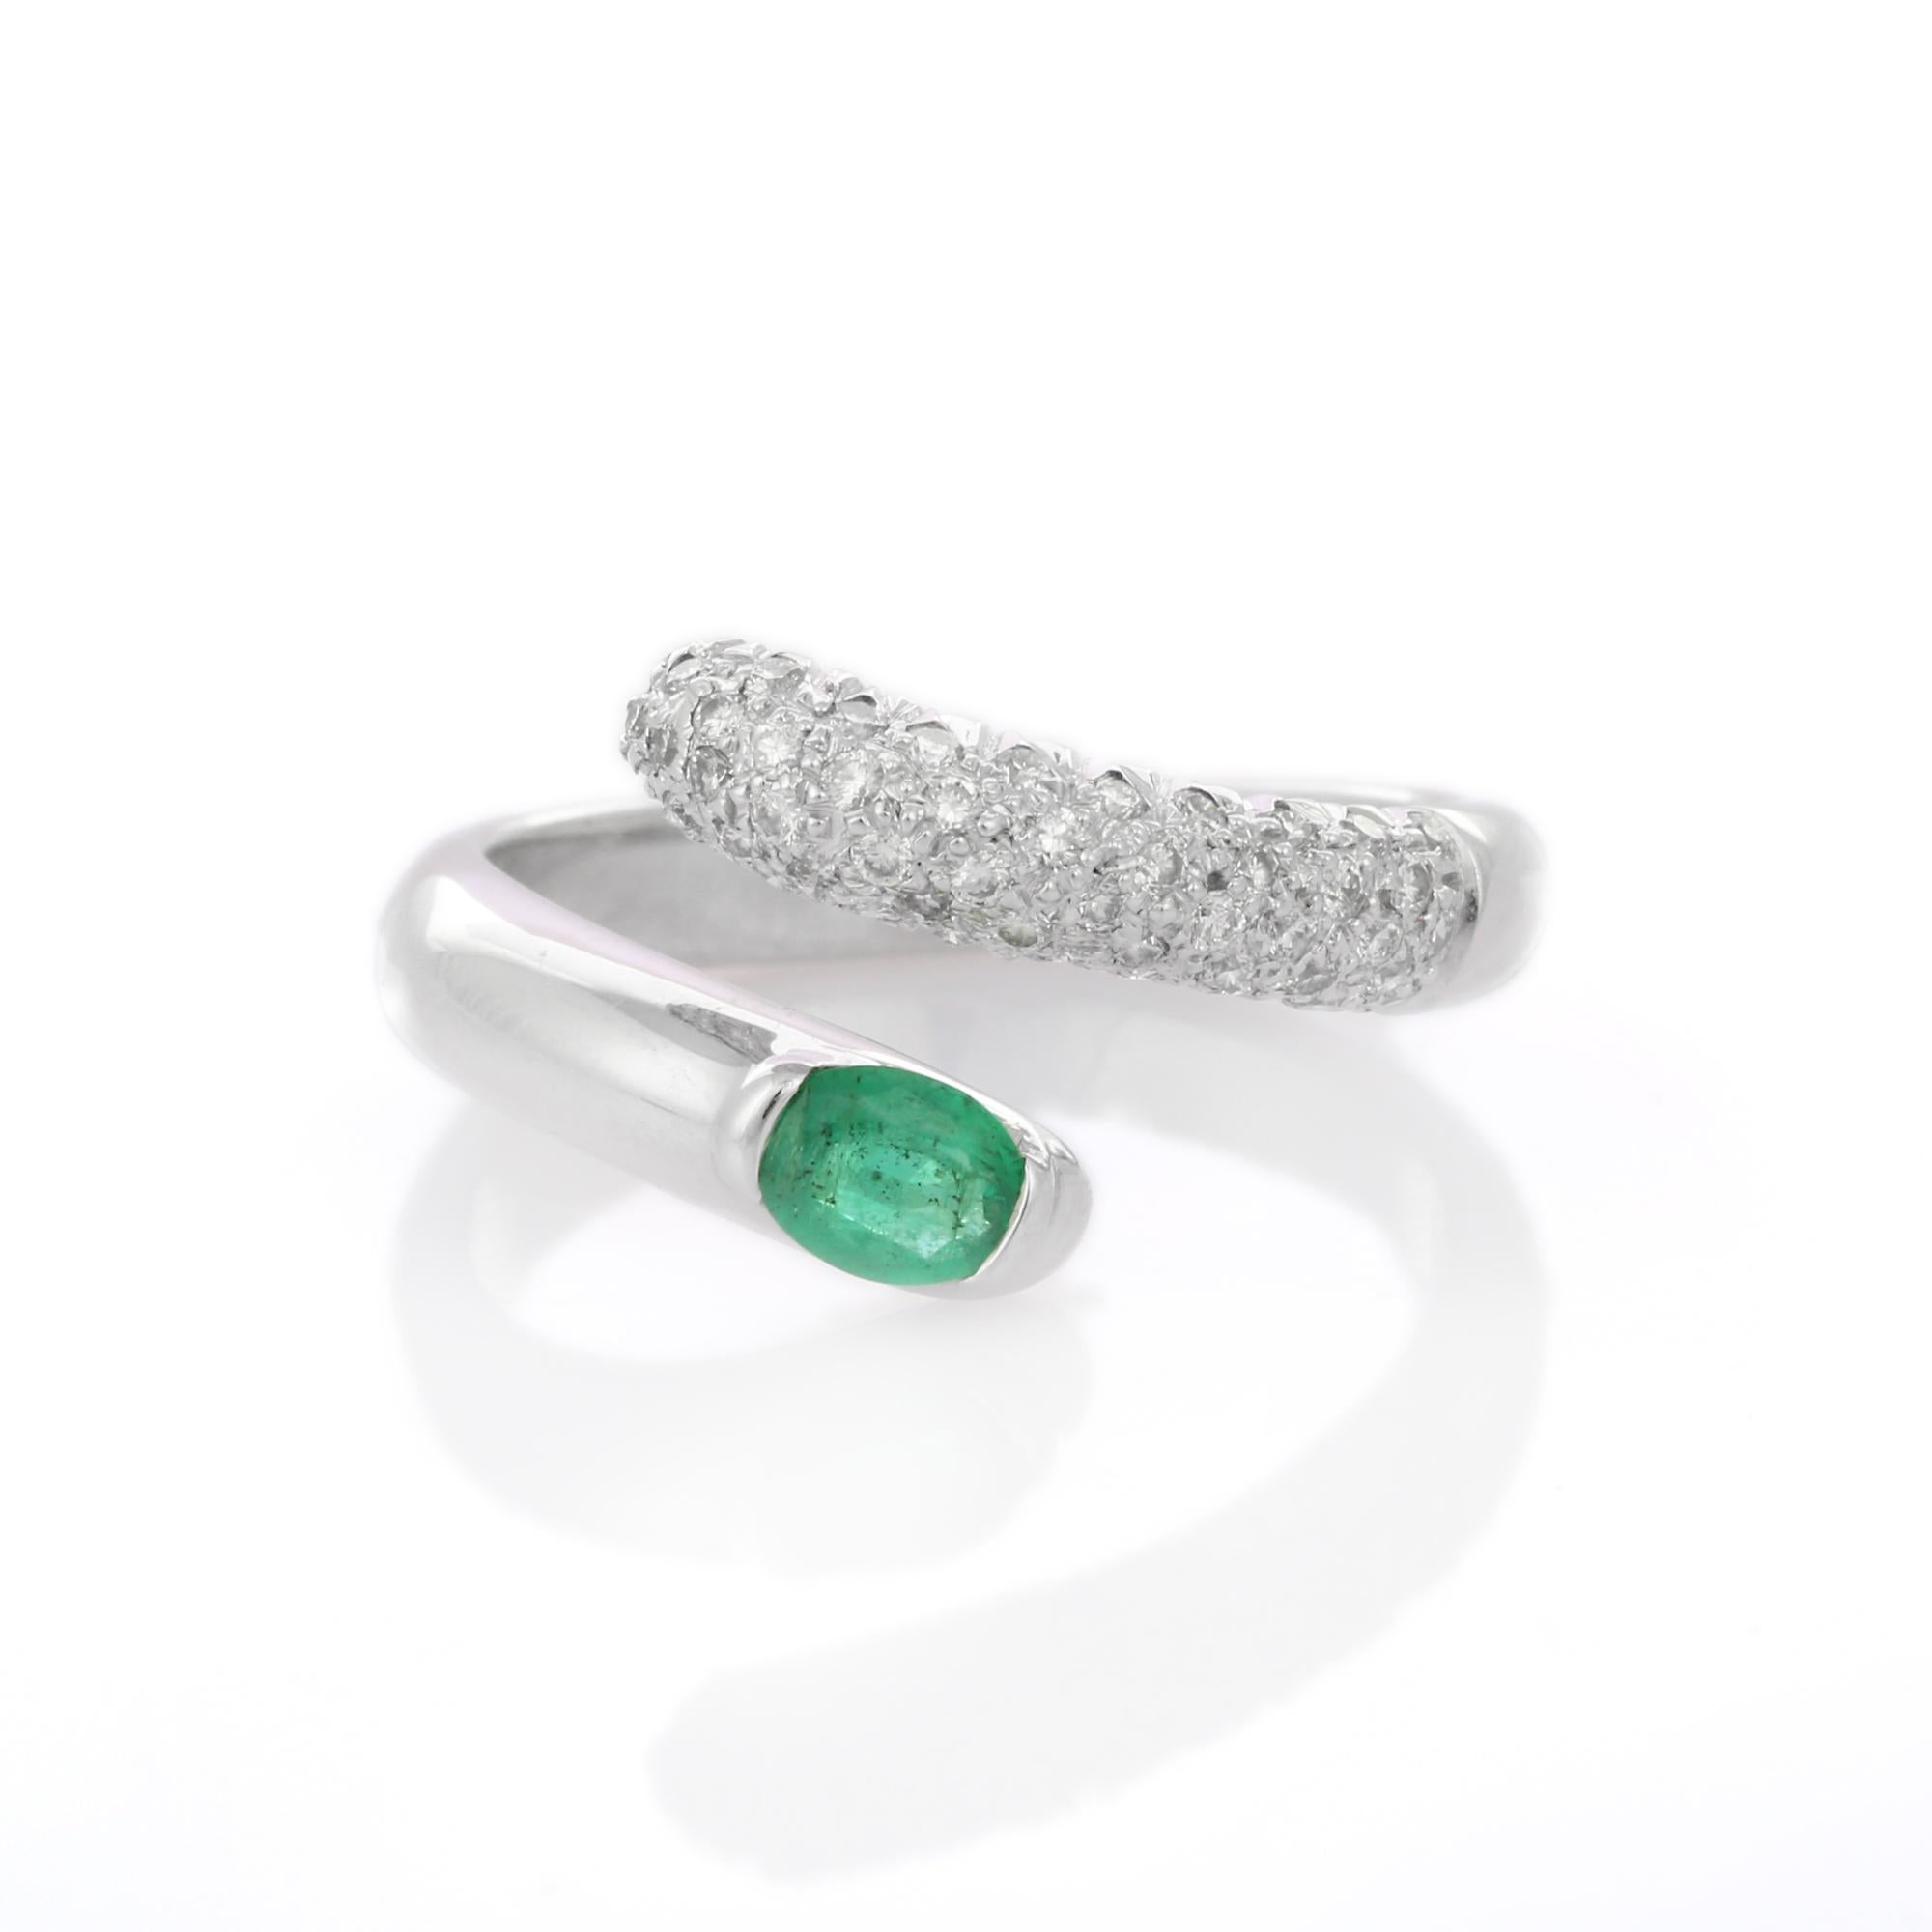 For Sale:  Substantial 18K White Gold Emerald Bypass Ring with Diamonds  2